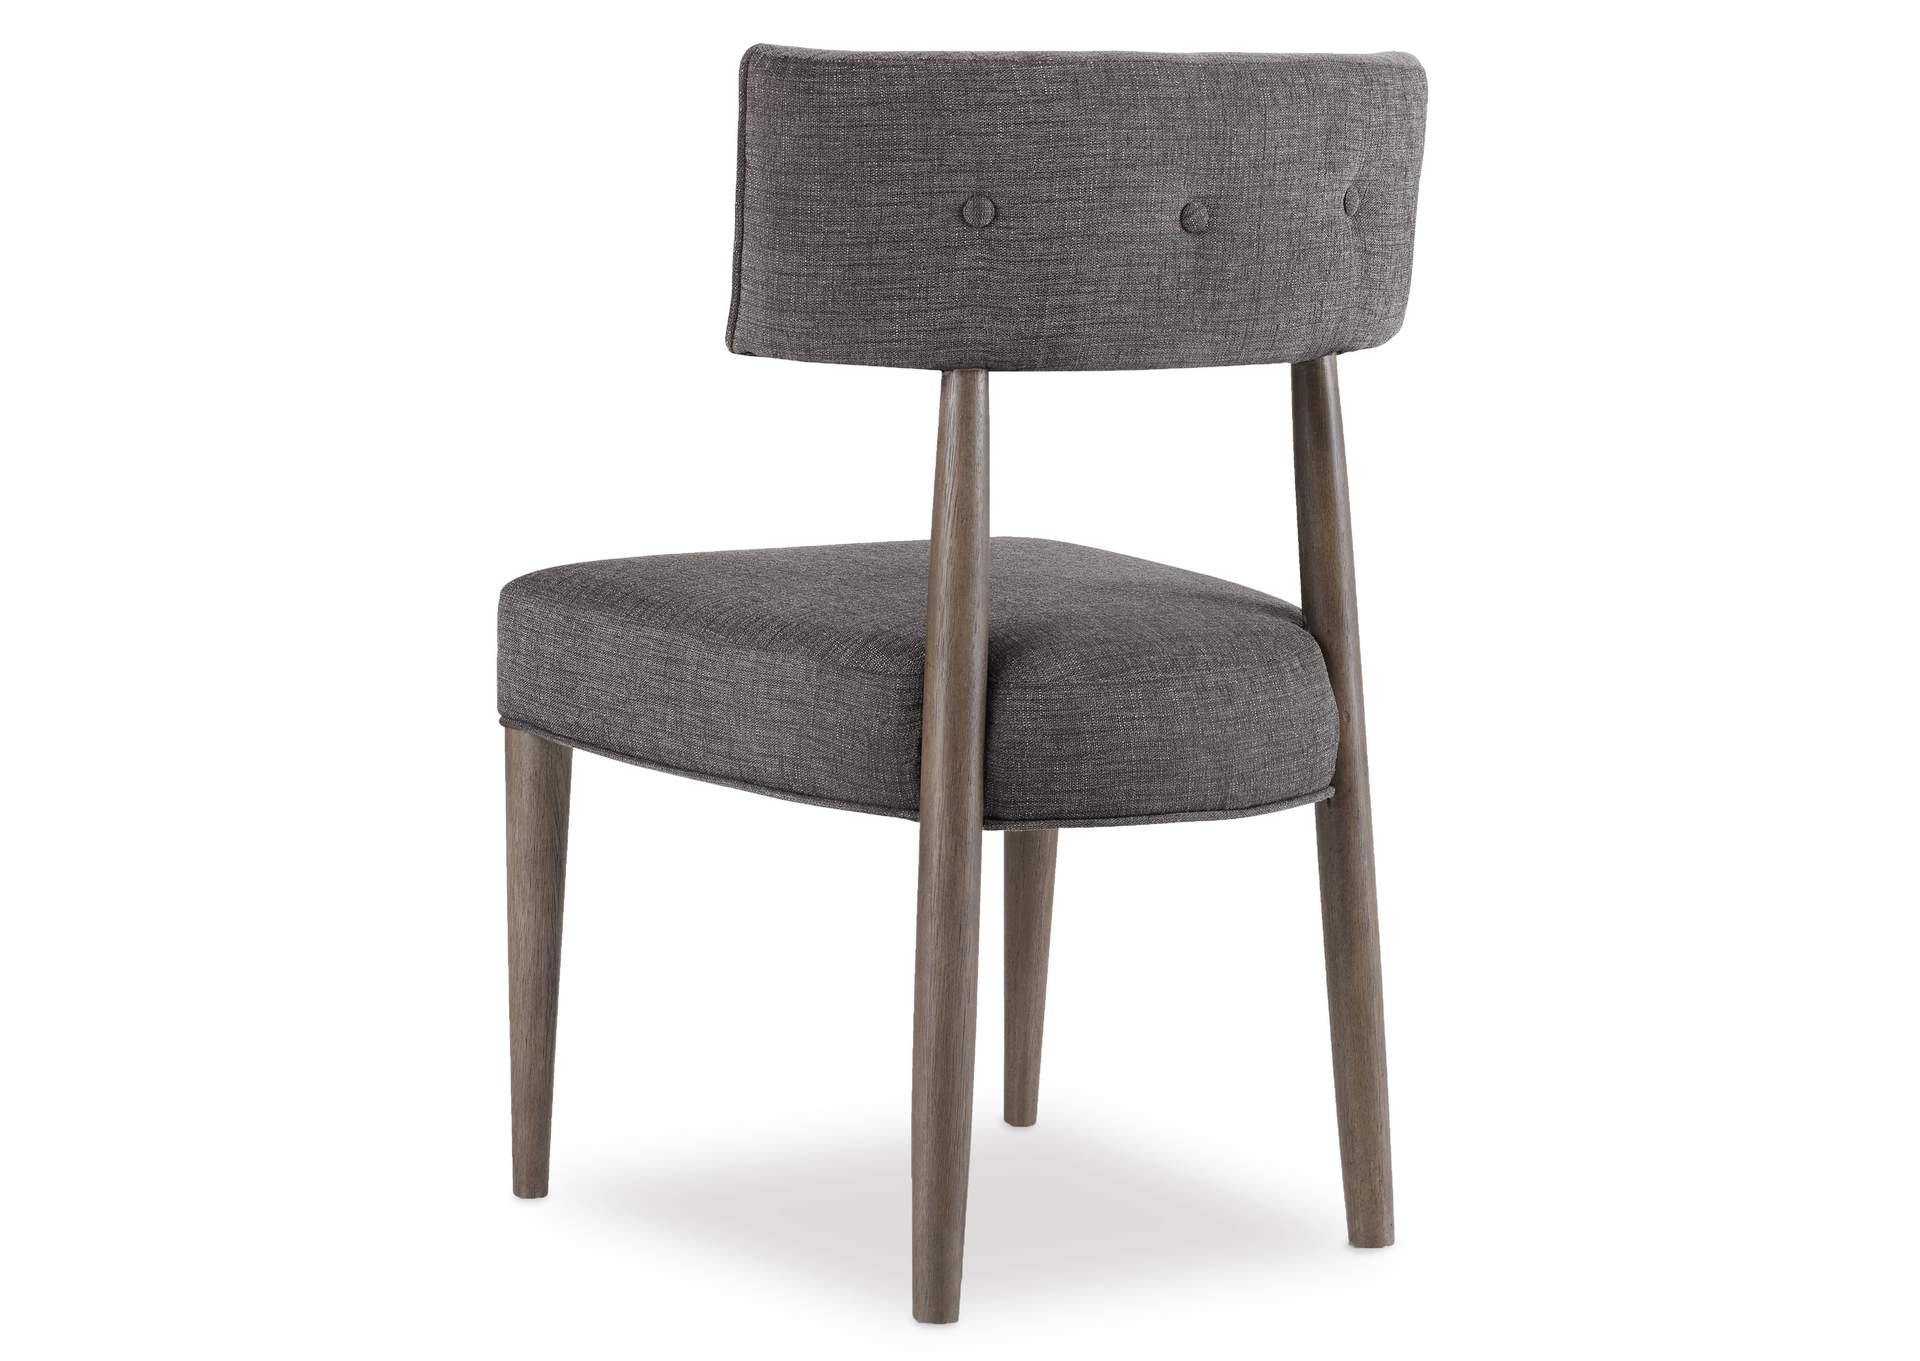 Curata Upholstered Chair,Hooker Furniture